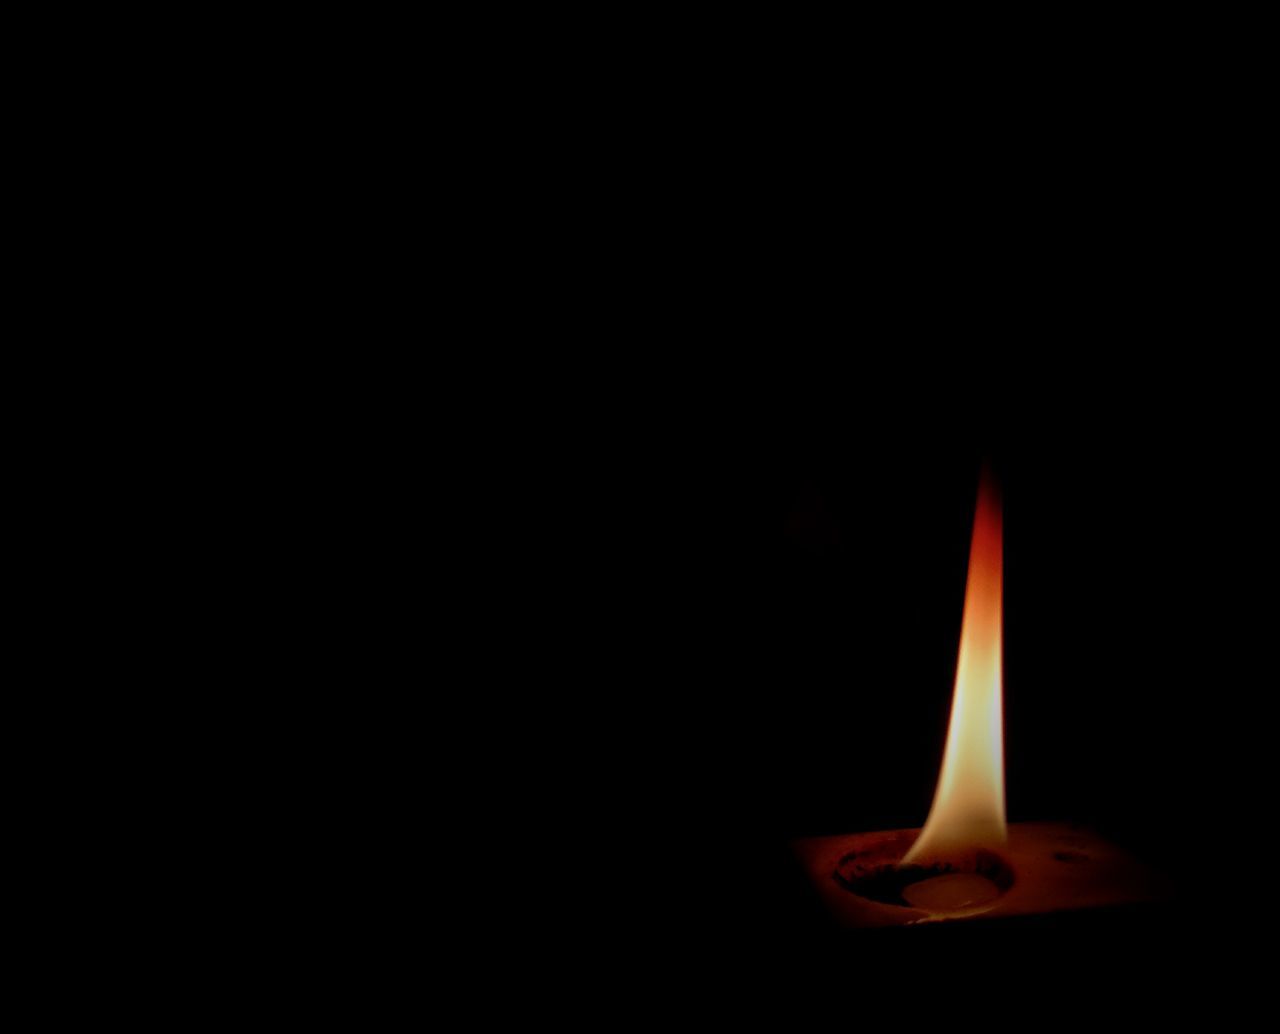 CLOSE-UP OF BURNING CANDLE IN DARKROOM